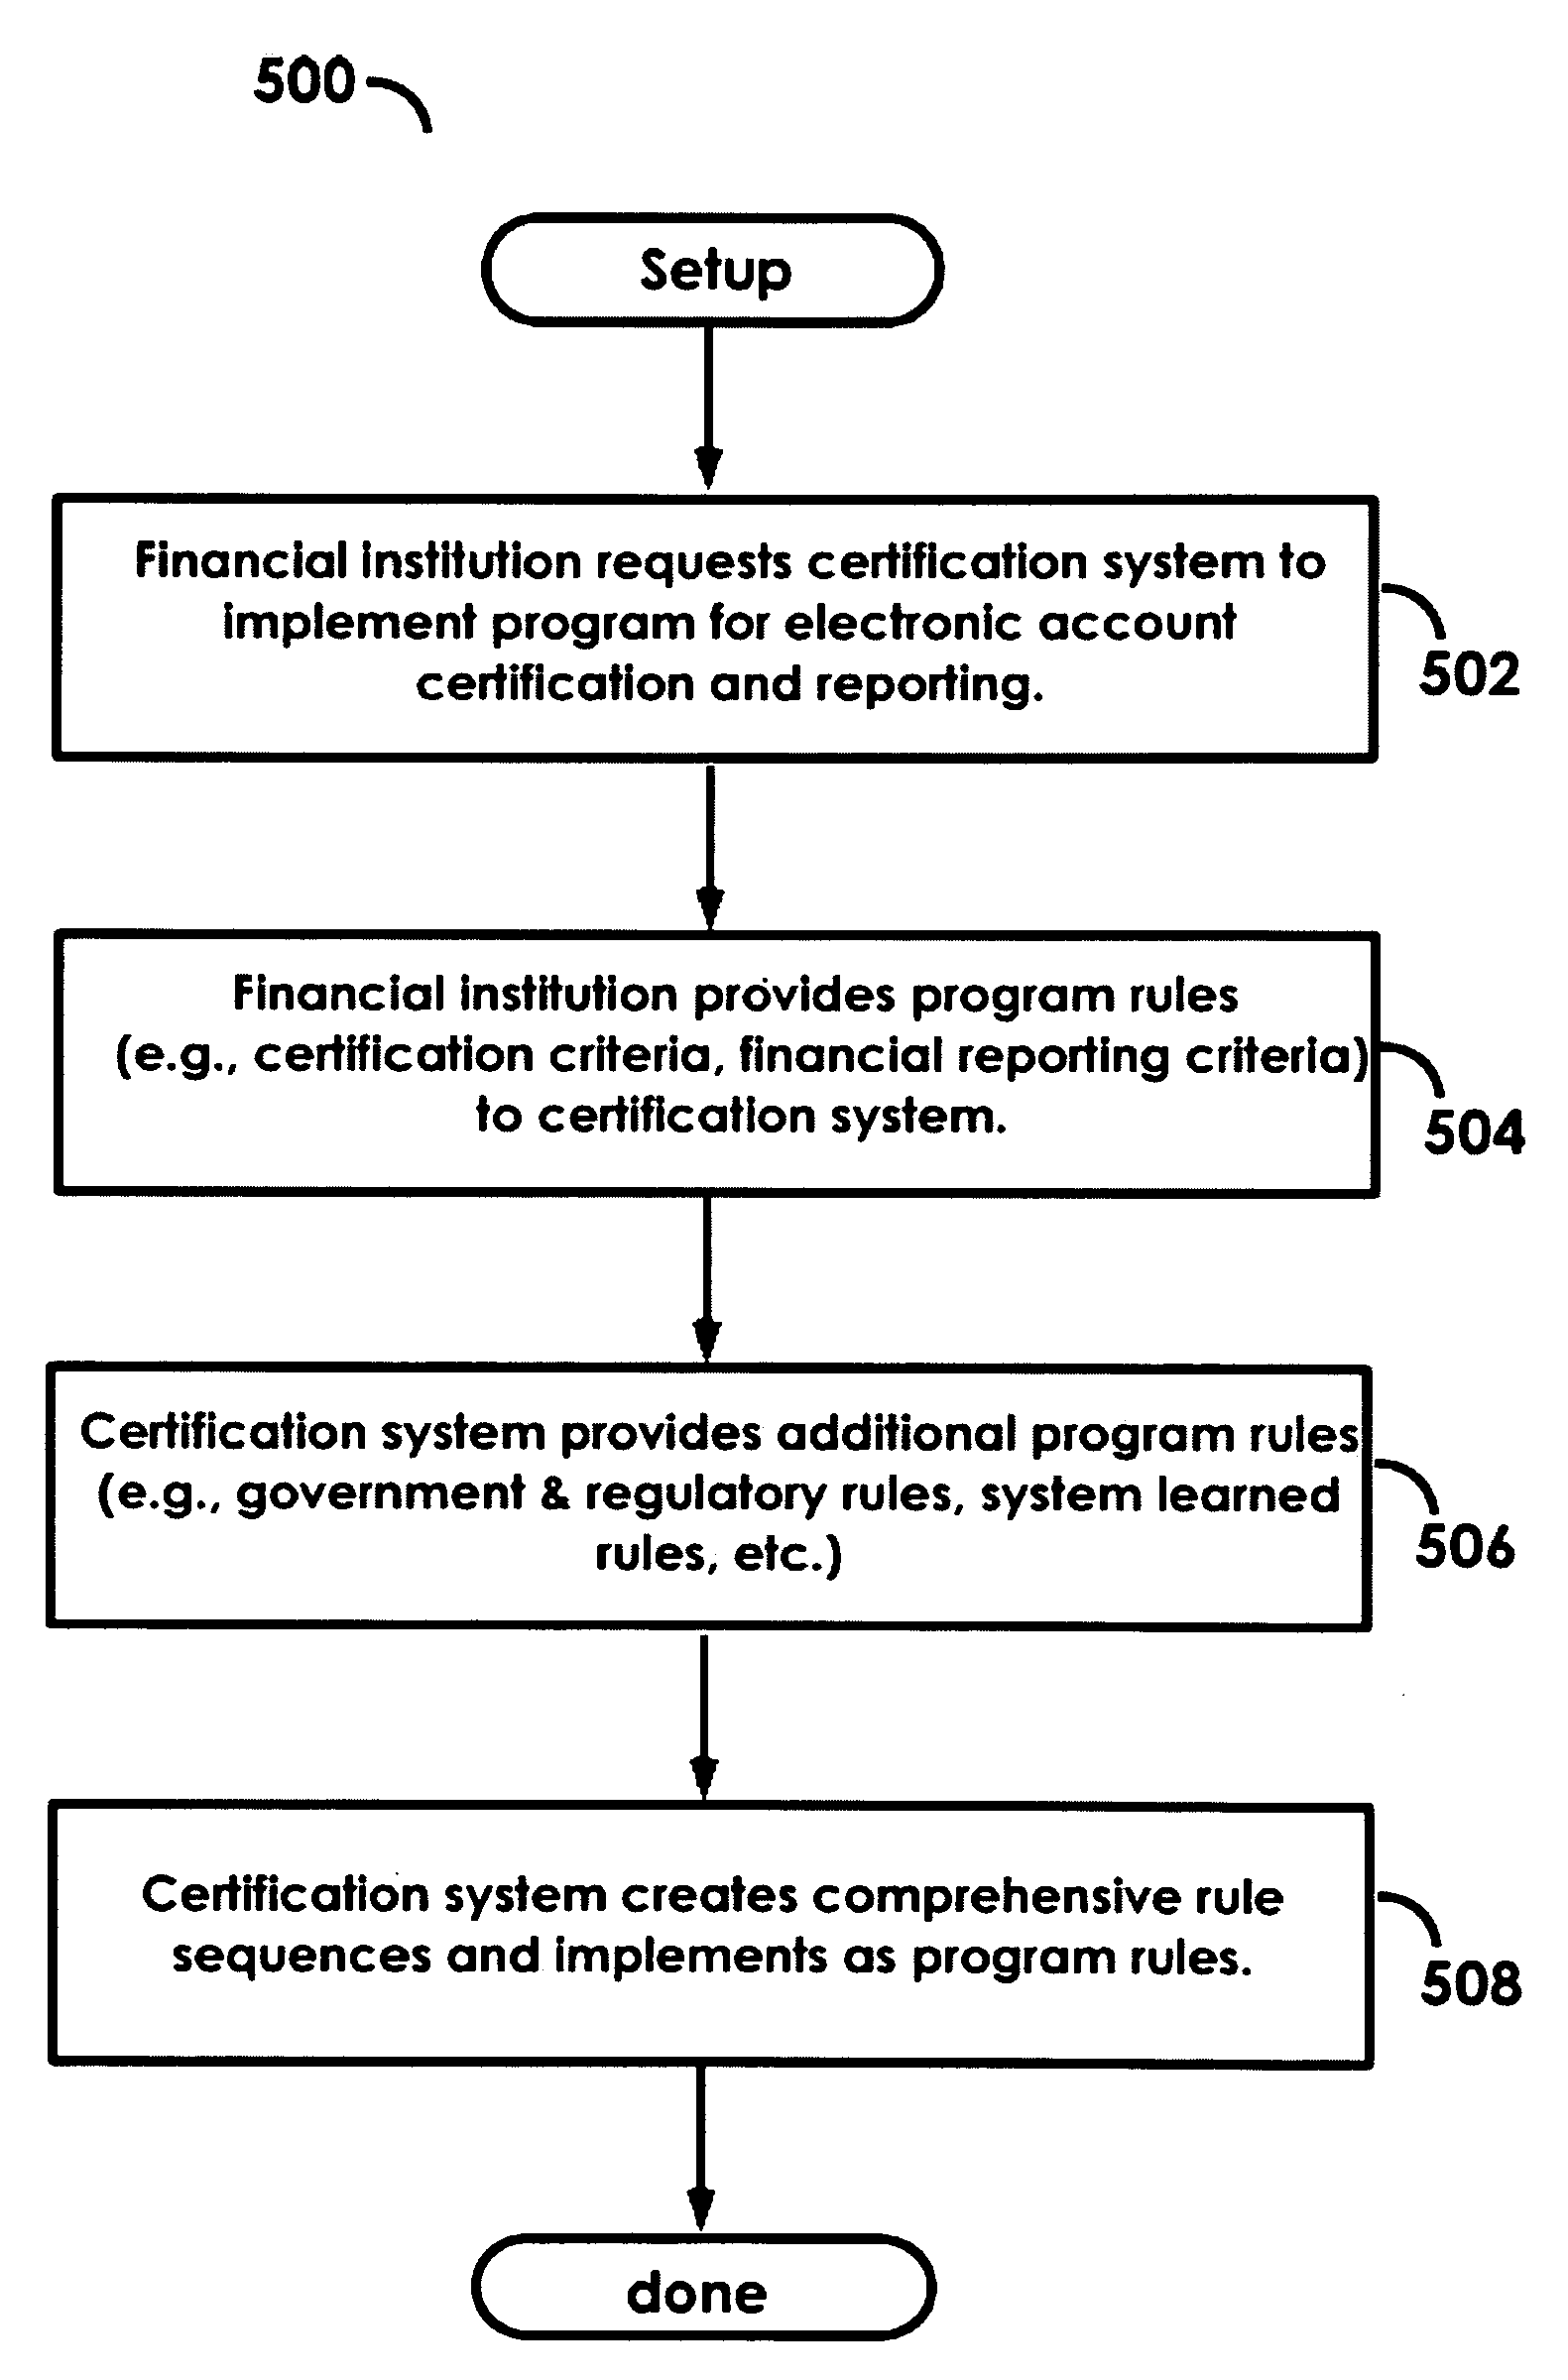 Systems and methods for electronic account certification and enhanced credit reporting